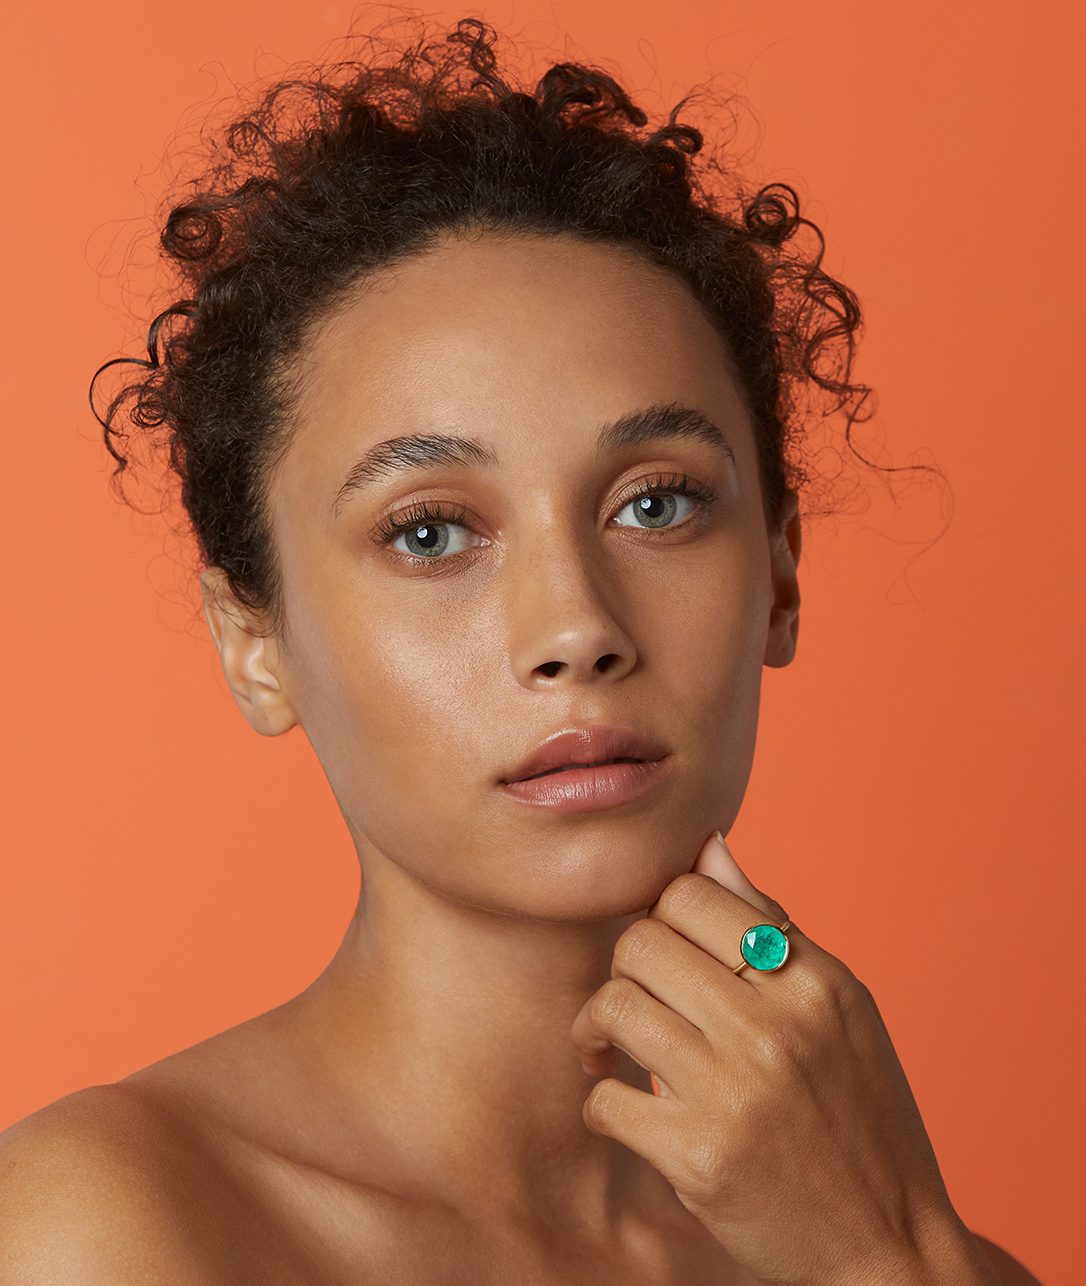 Our Bezel Set Rings combine a unique 18k gold setting with crimped scalloped edges to frame glossy, jaw-dropping one-of-a-kind gemstones in the most saturated hues. The perfect accessory for a holiday happy hour fete.SHOP BEZEL RINGS